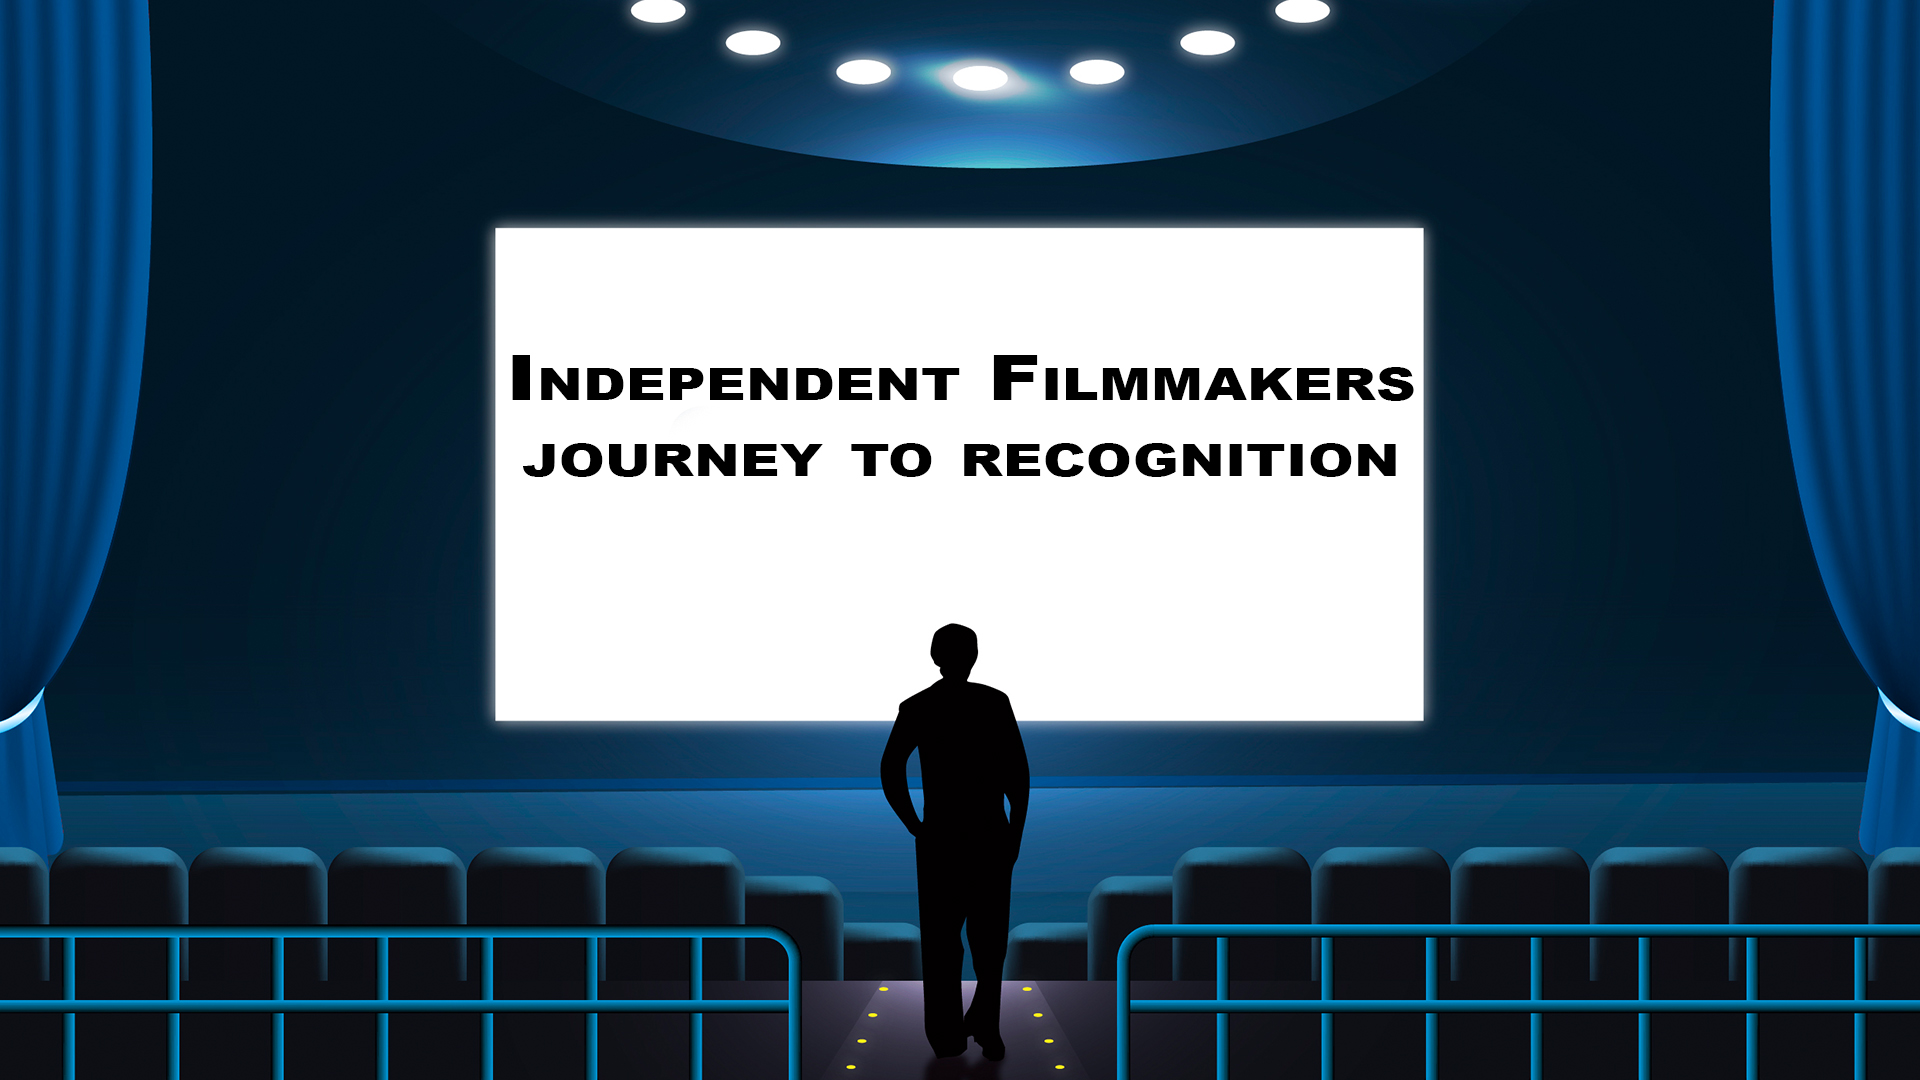 An Independent Filmmakers journey towards recognition